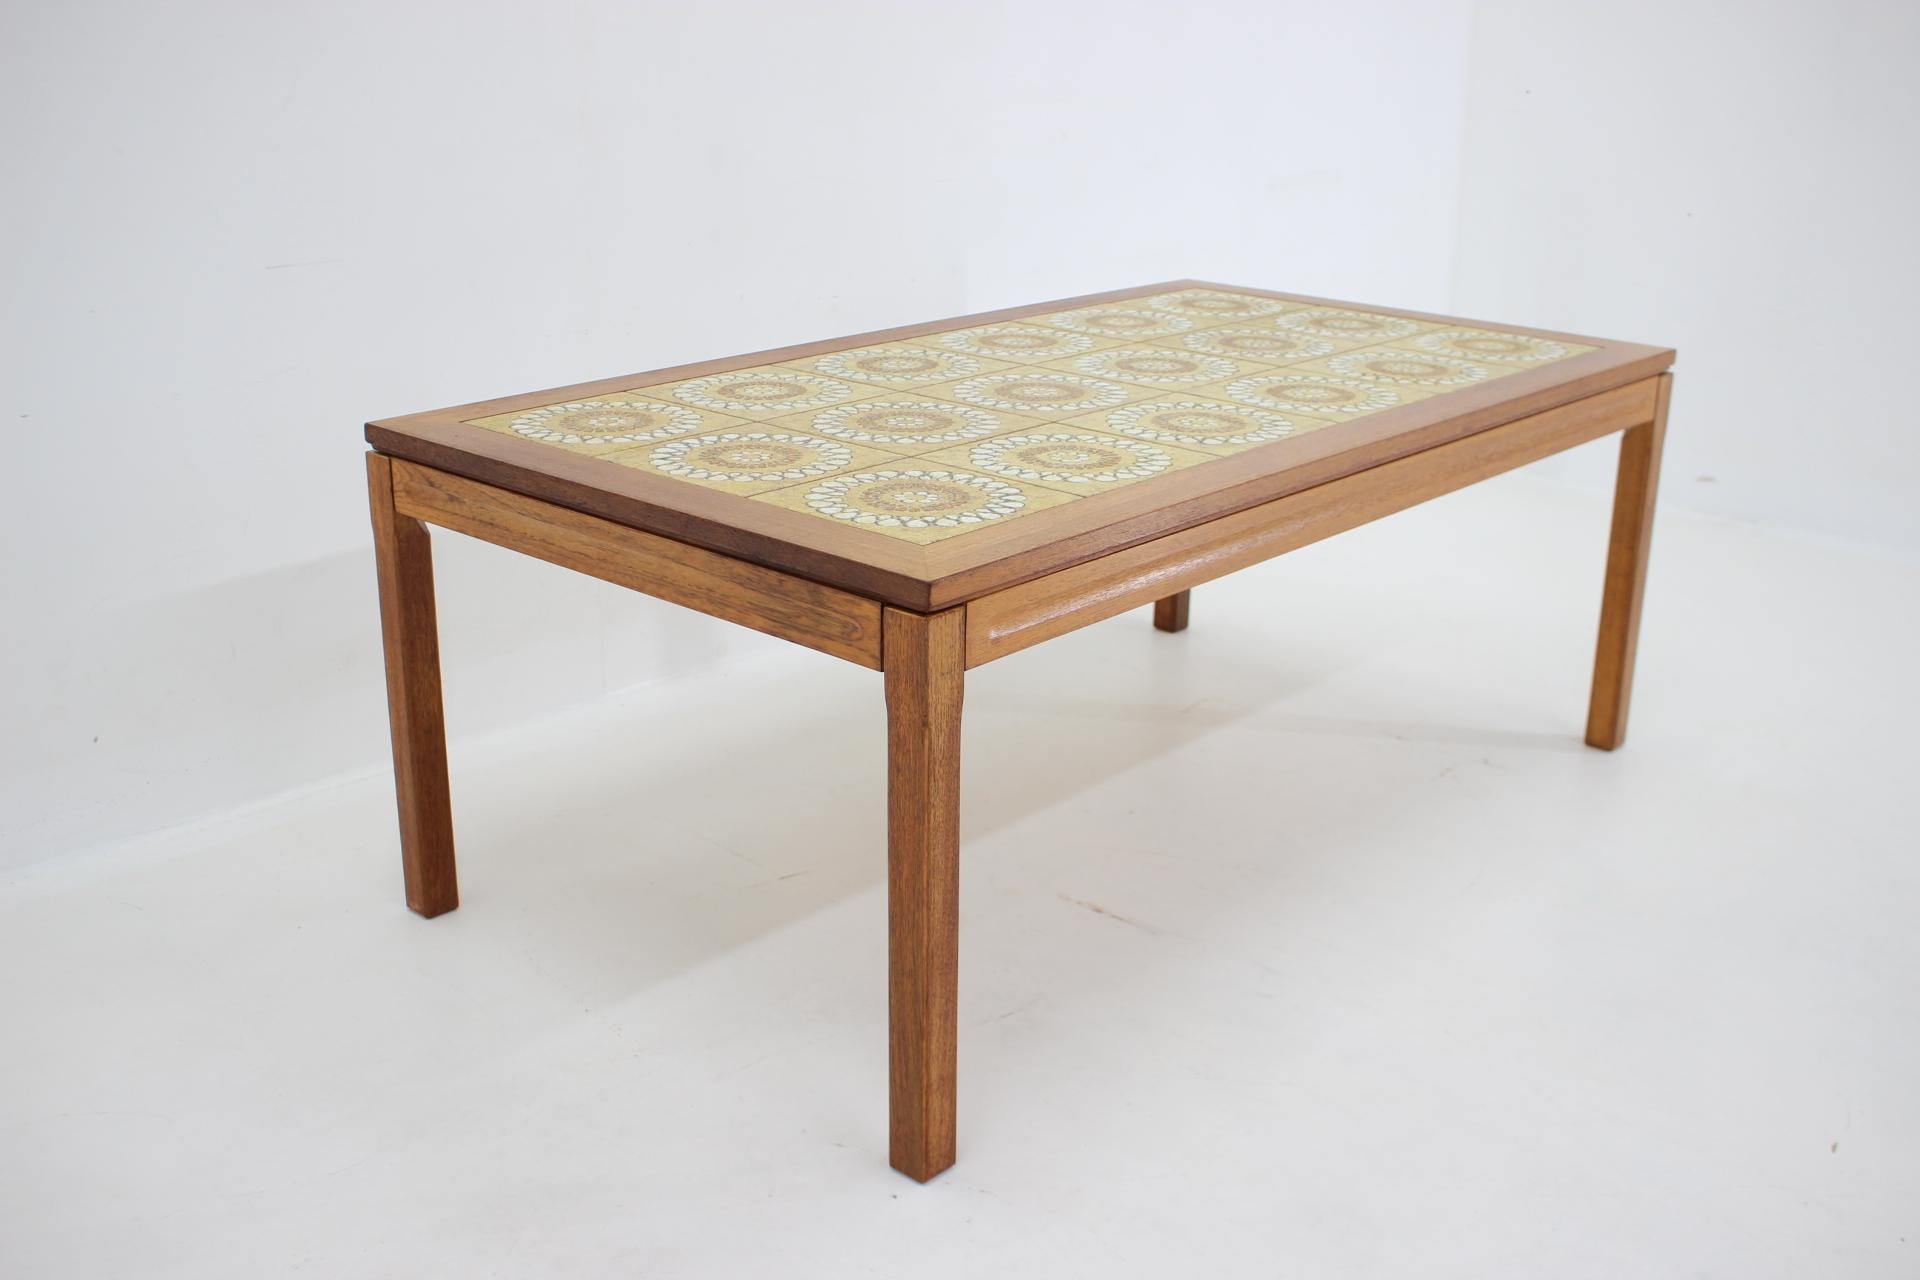 Wood 1960s Palisander and Tile Coffee Table, Denmark For Sale